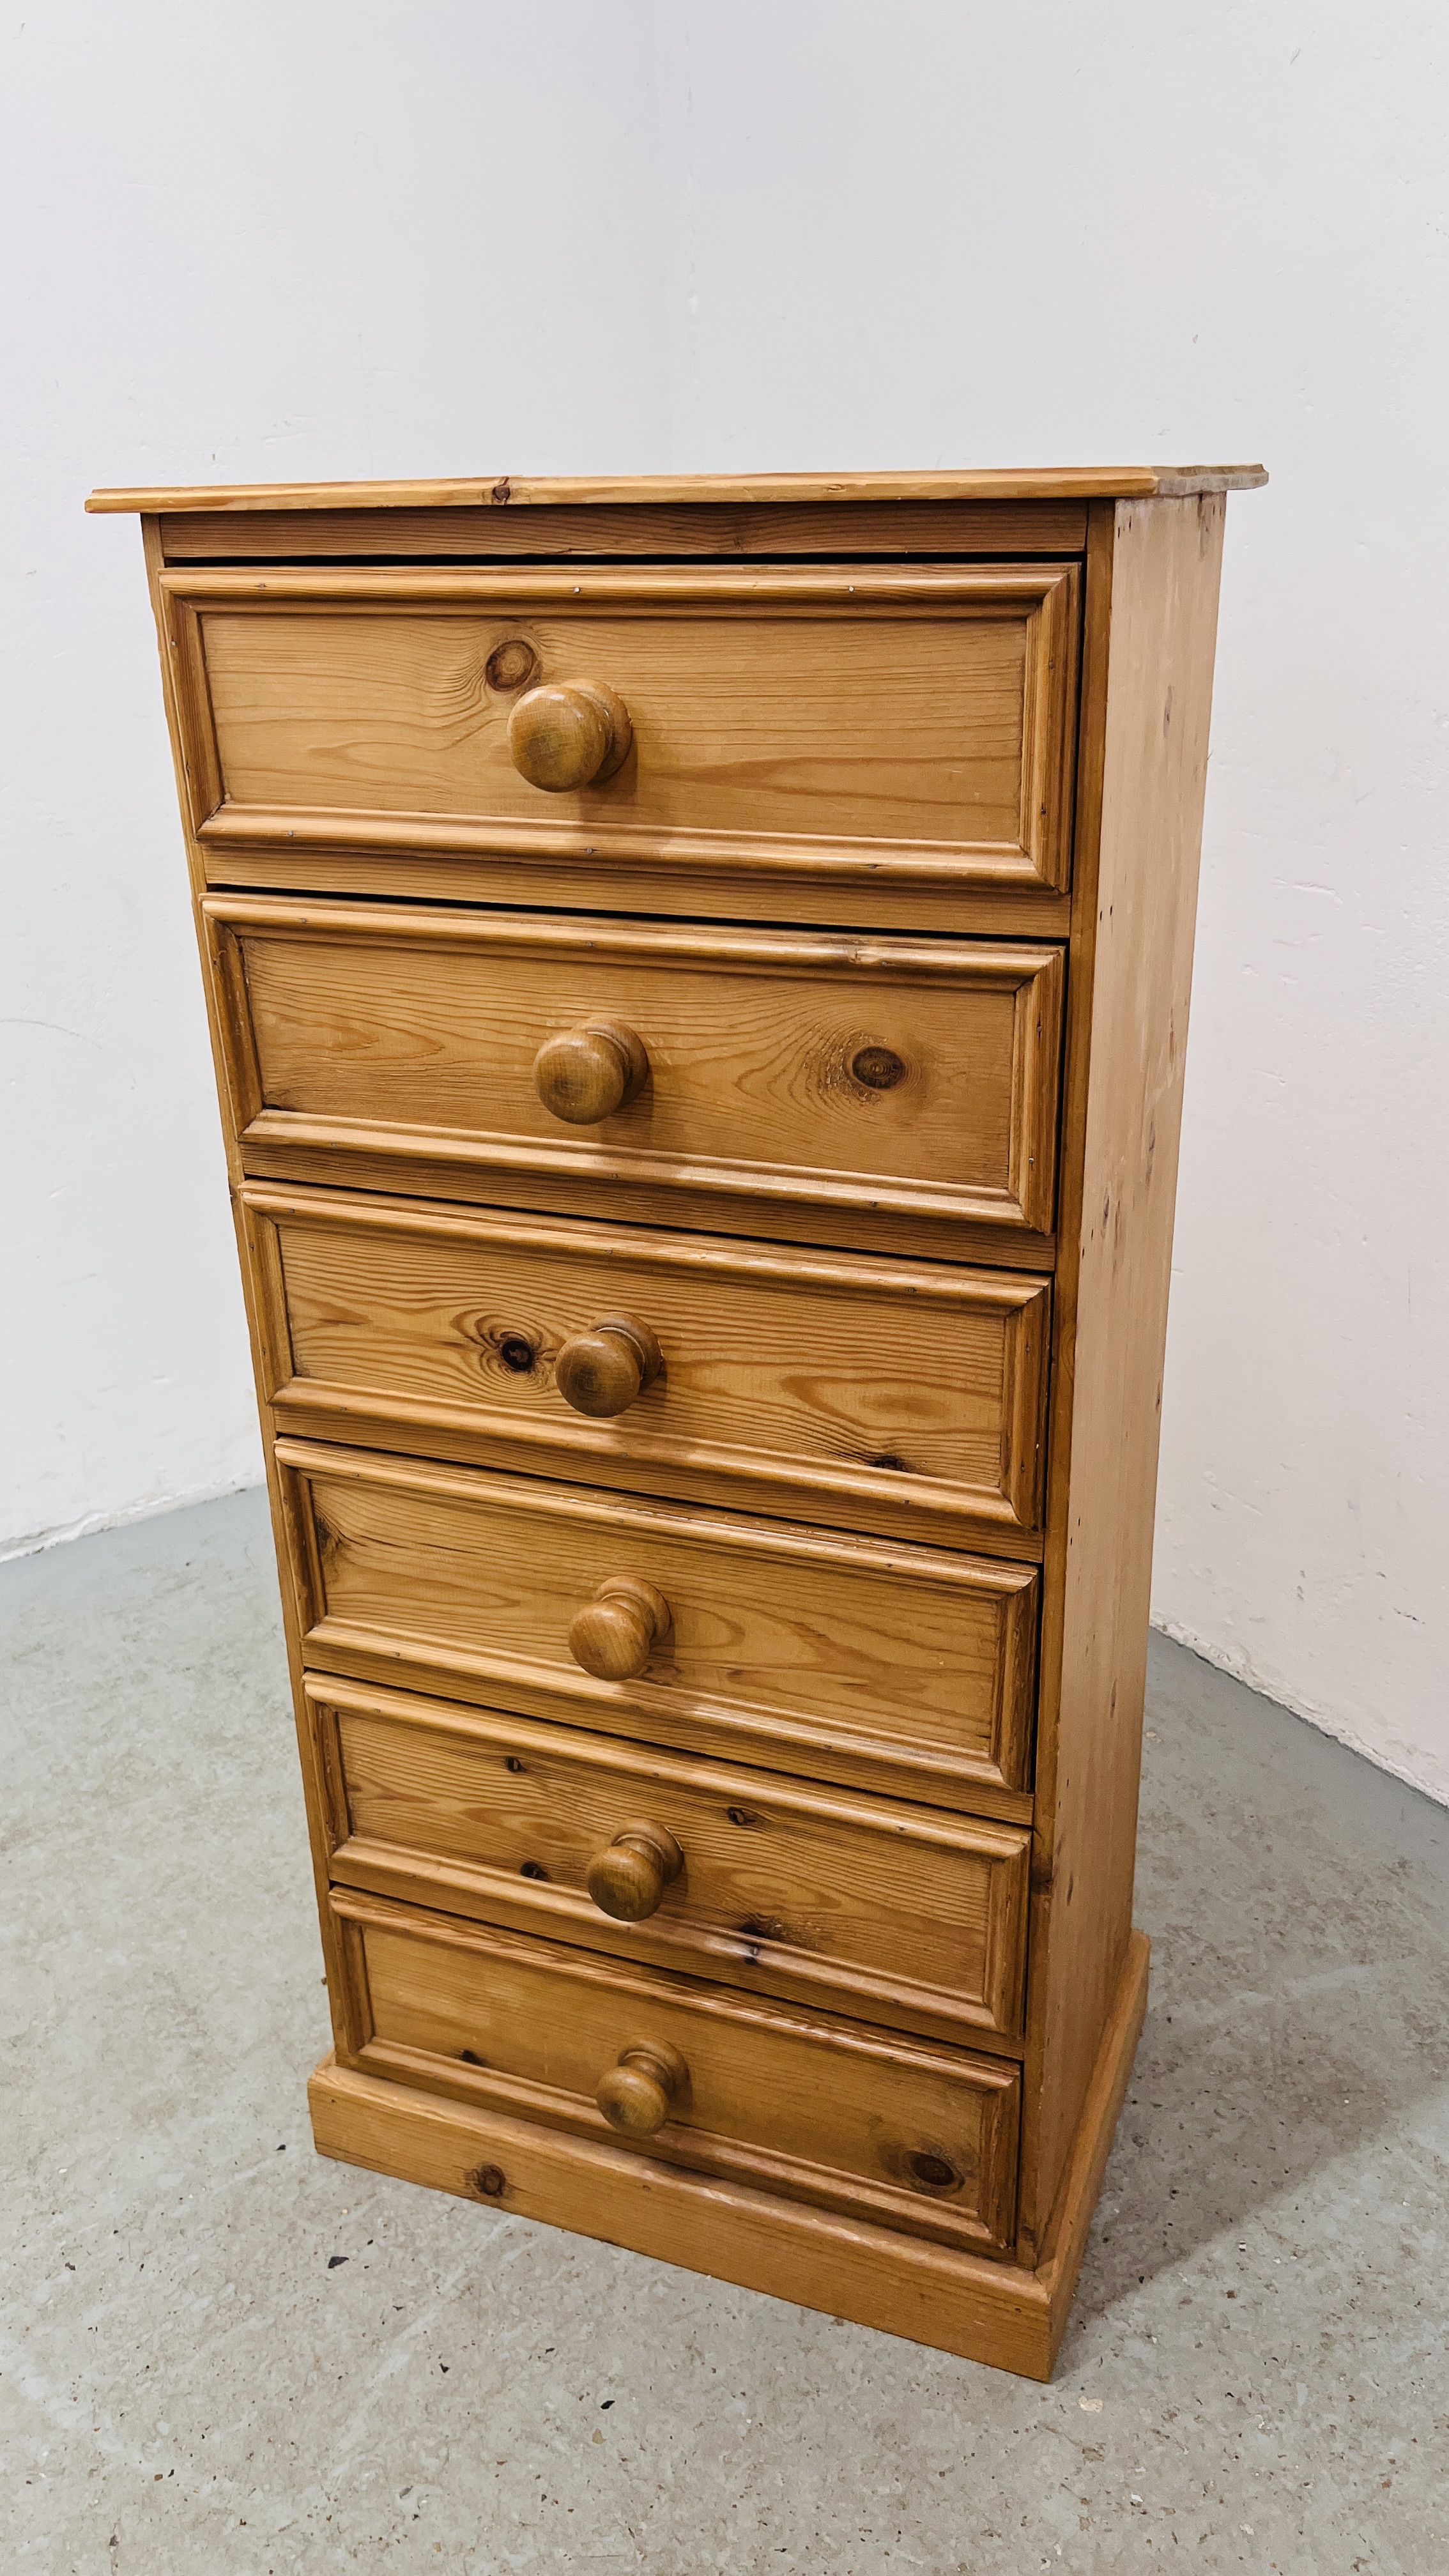 WAXED PINE SIX DRAWER TOWER CHEST HEIGHT 106CM. WIDTH 52CM. DEPTH 32CM.